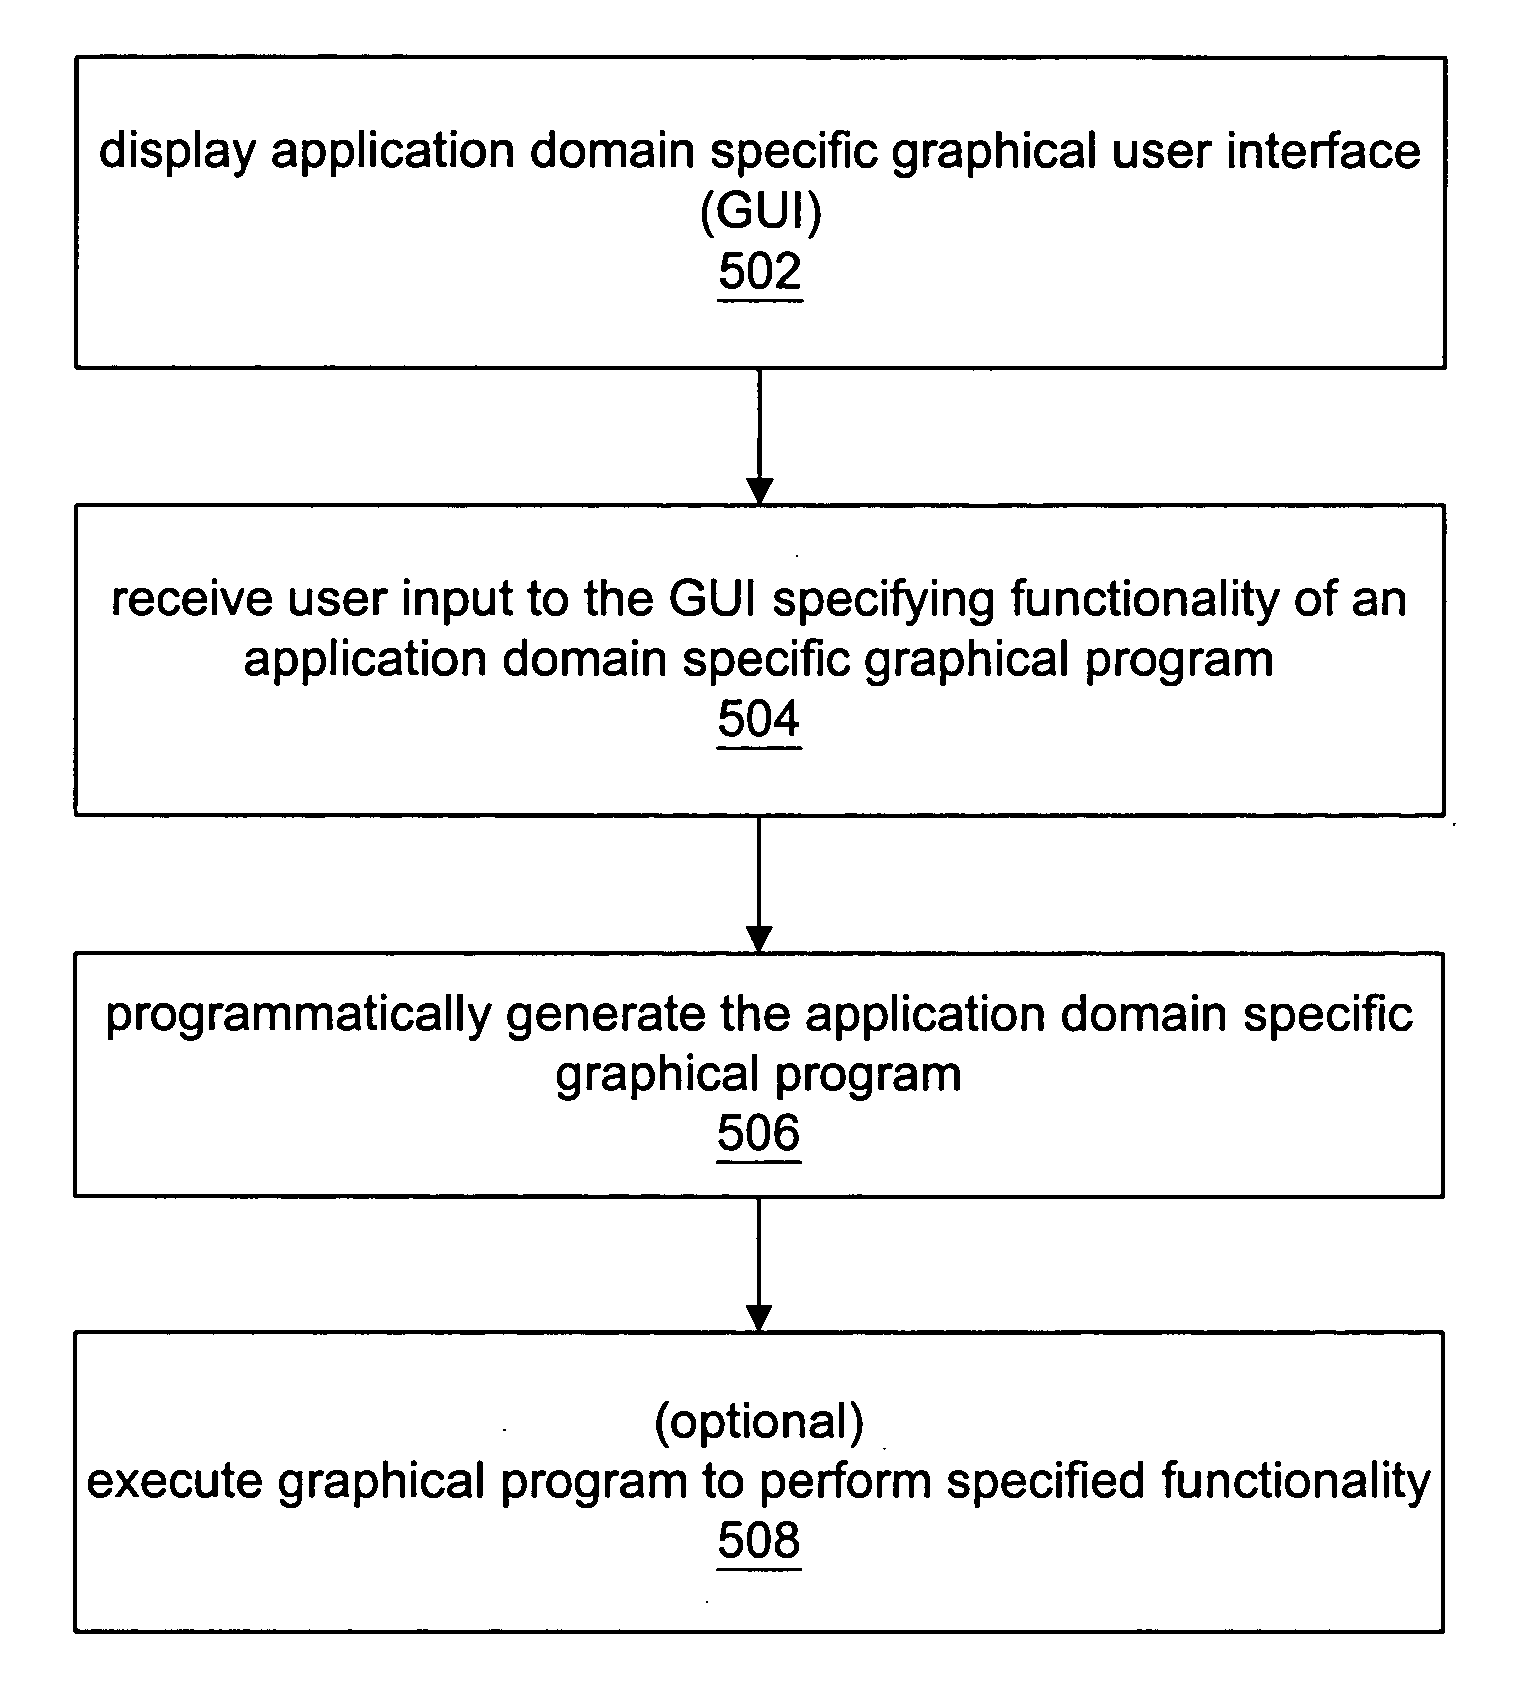 Programmatic generation of application domain specific graphical programs